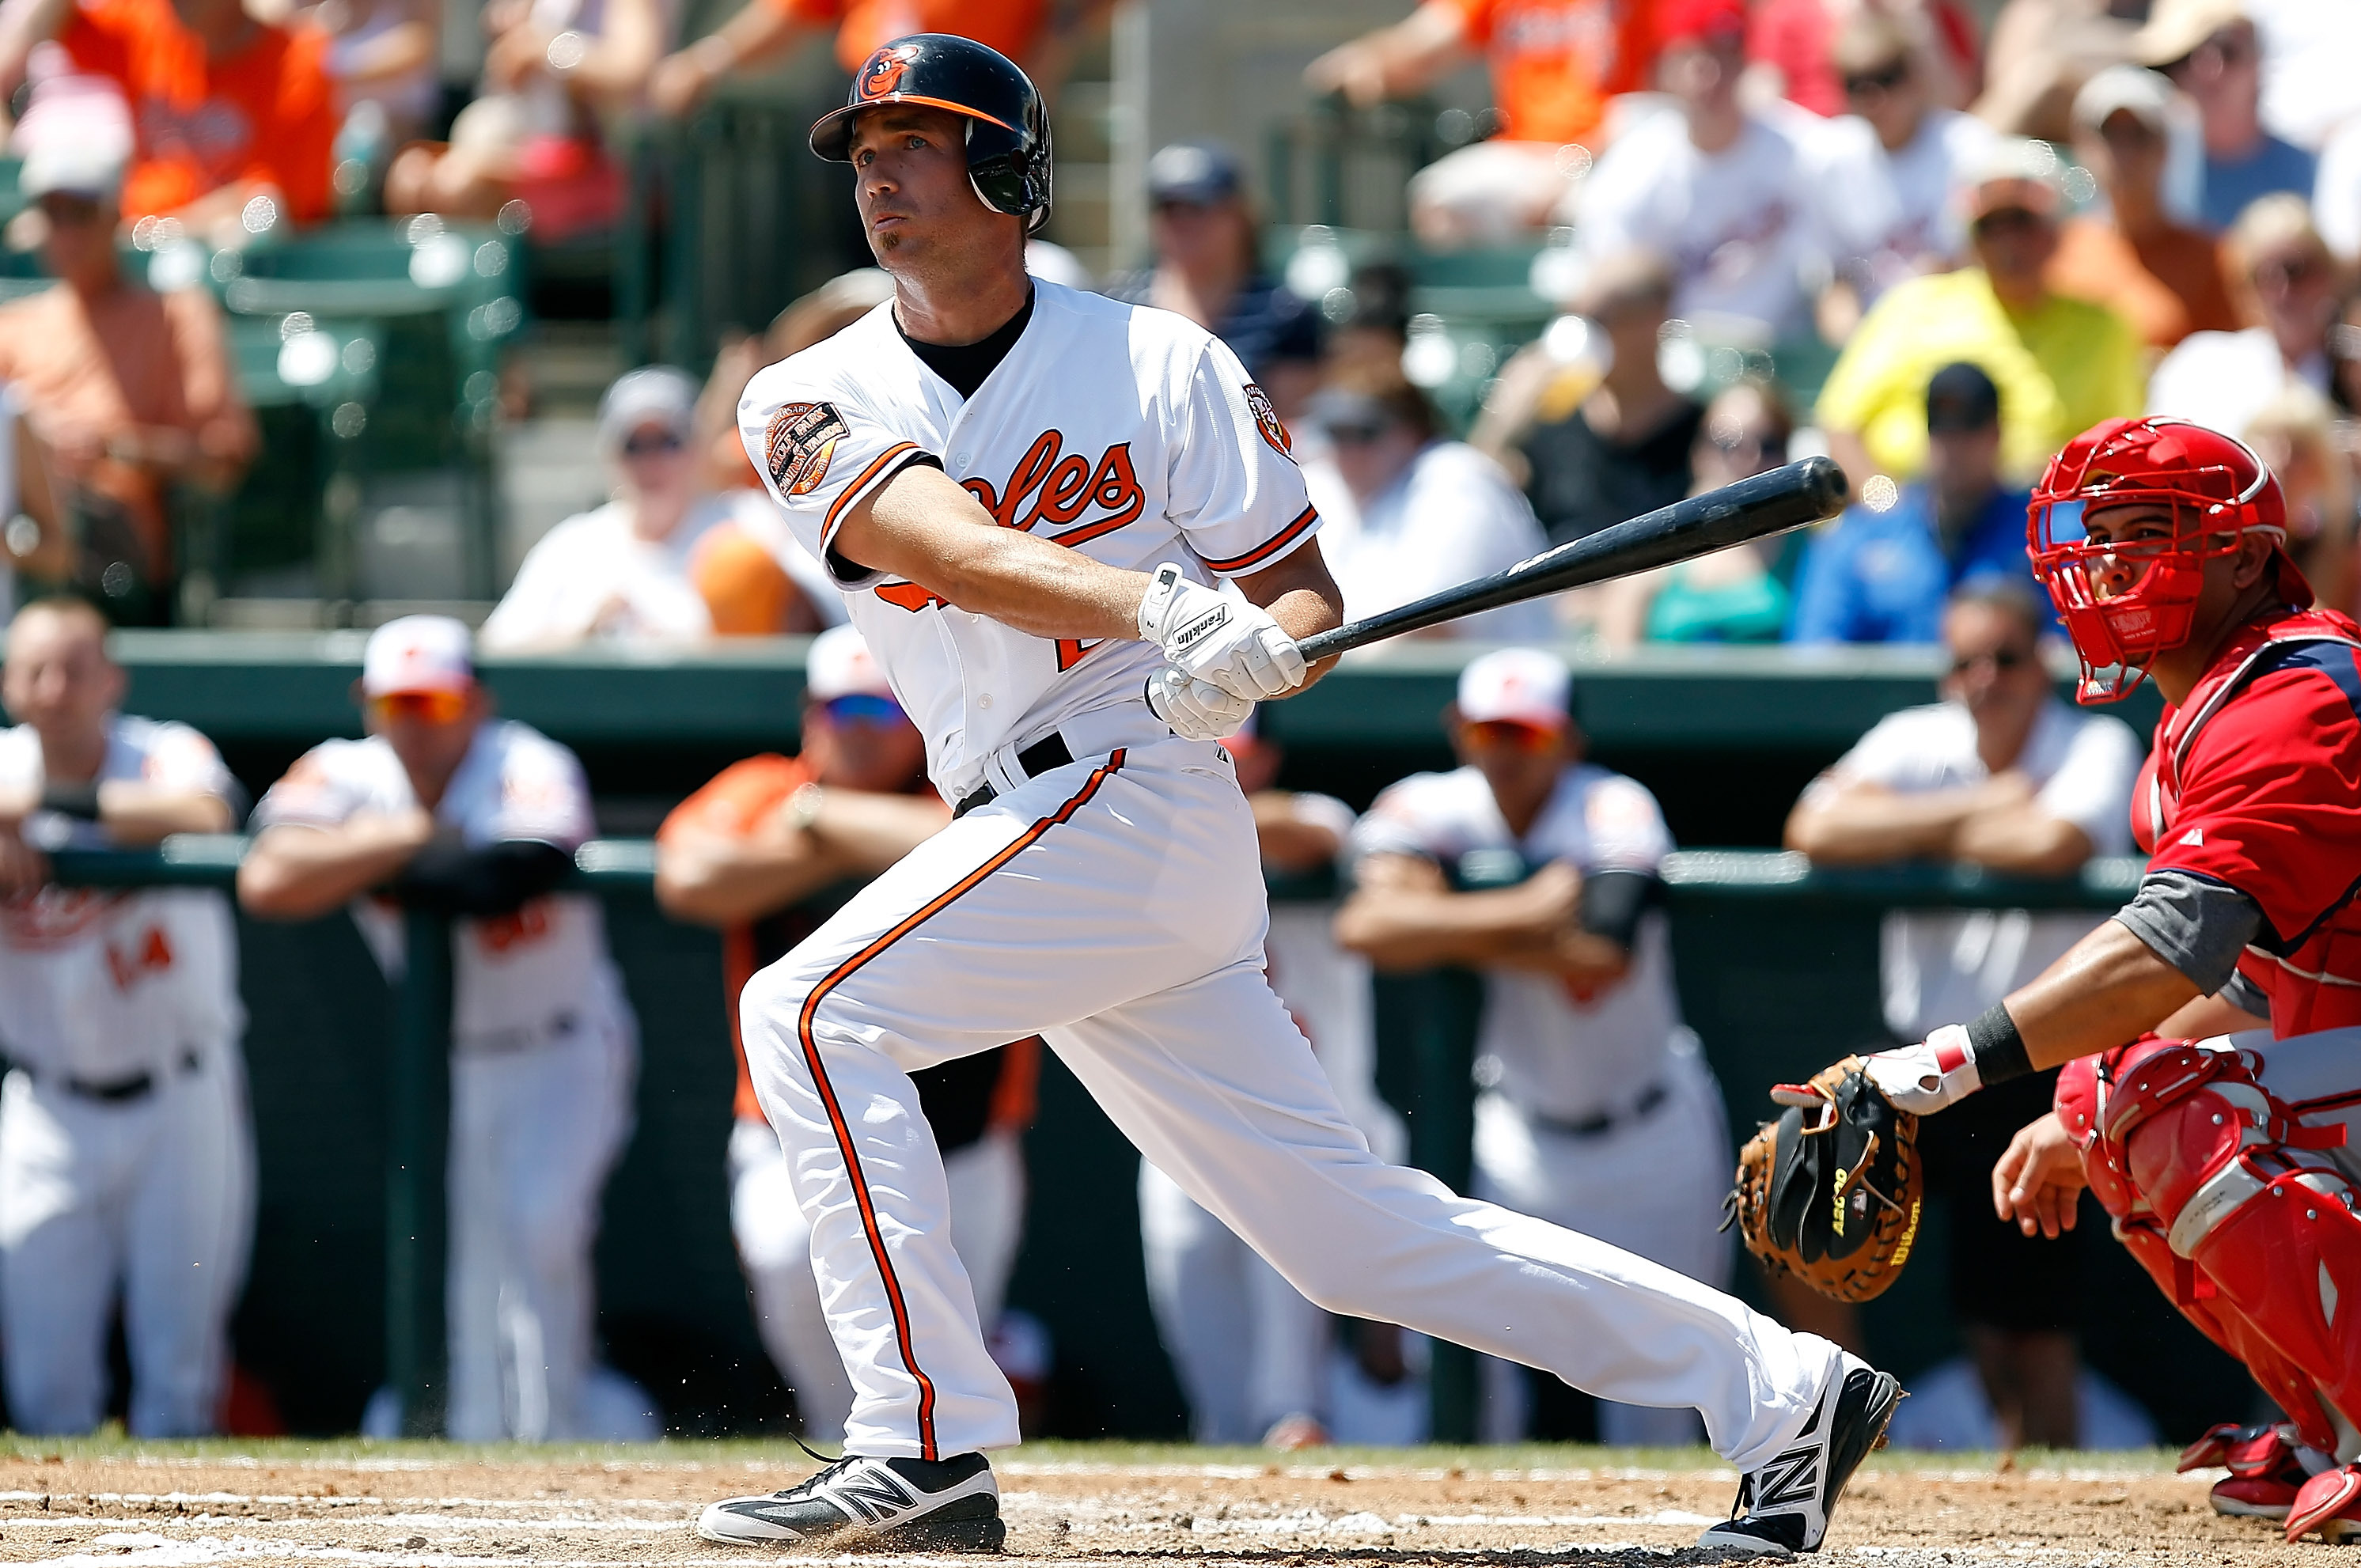 Orioles lose to Braves late, 6-5, as Nick Markakis goes 2-for-3 vs